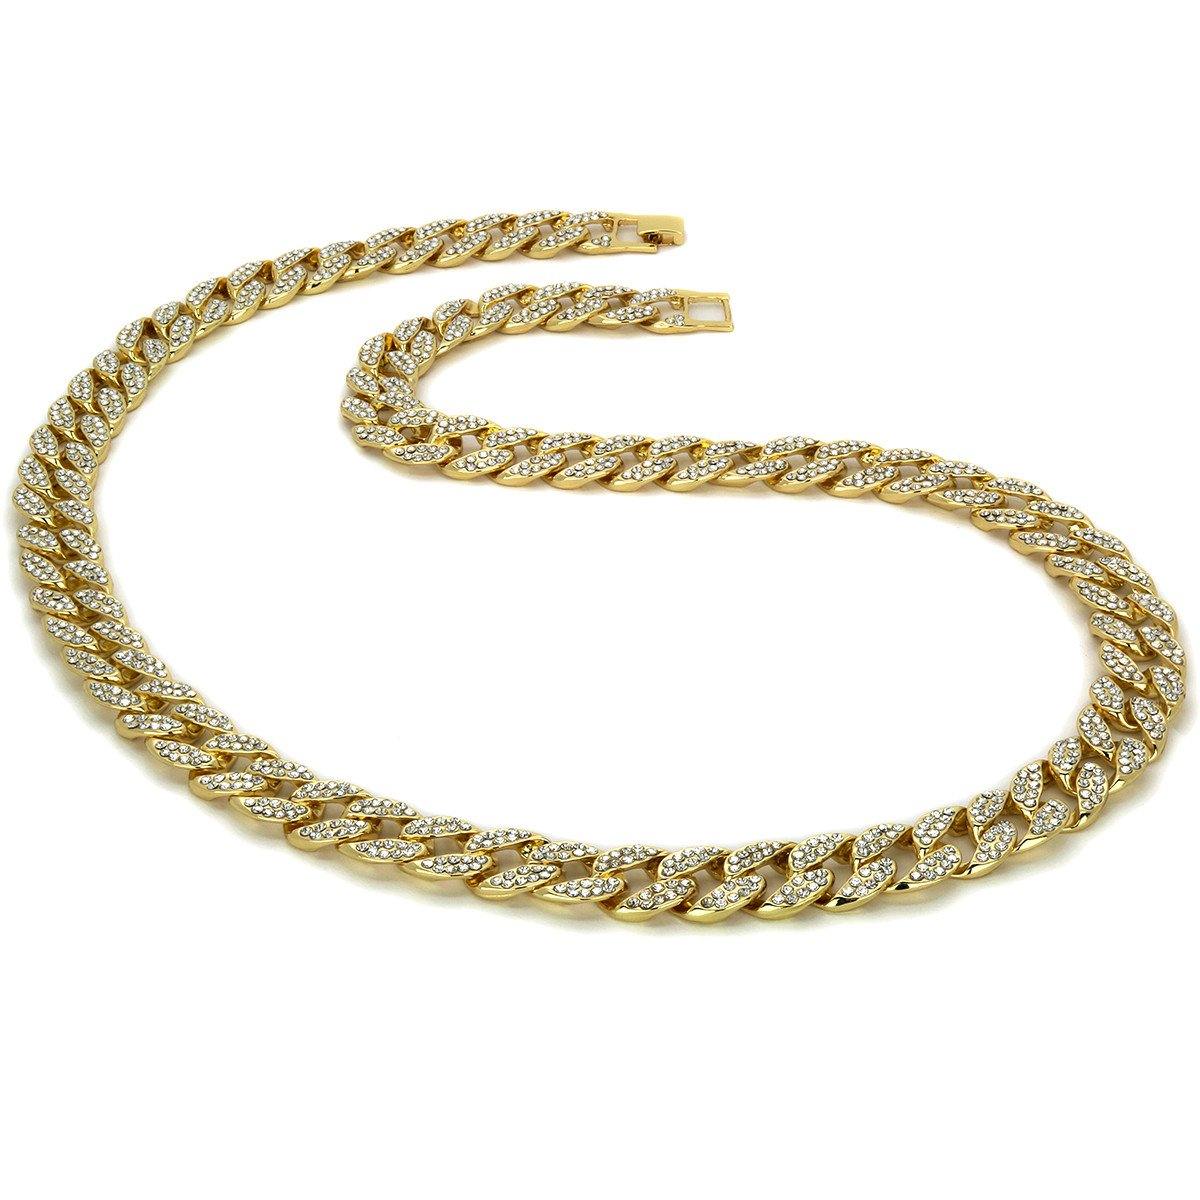 Real Gold Fille Cuban FULLY Cz Chain Necklace 15mm 16" Inches